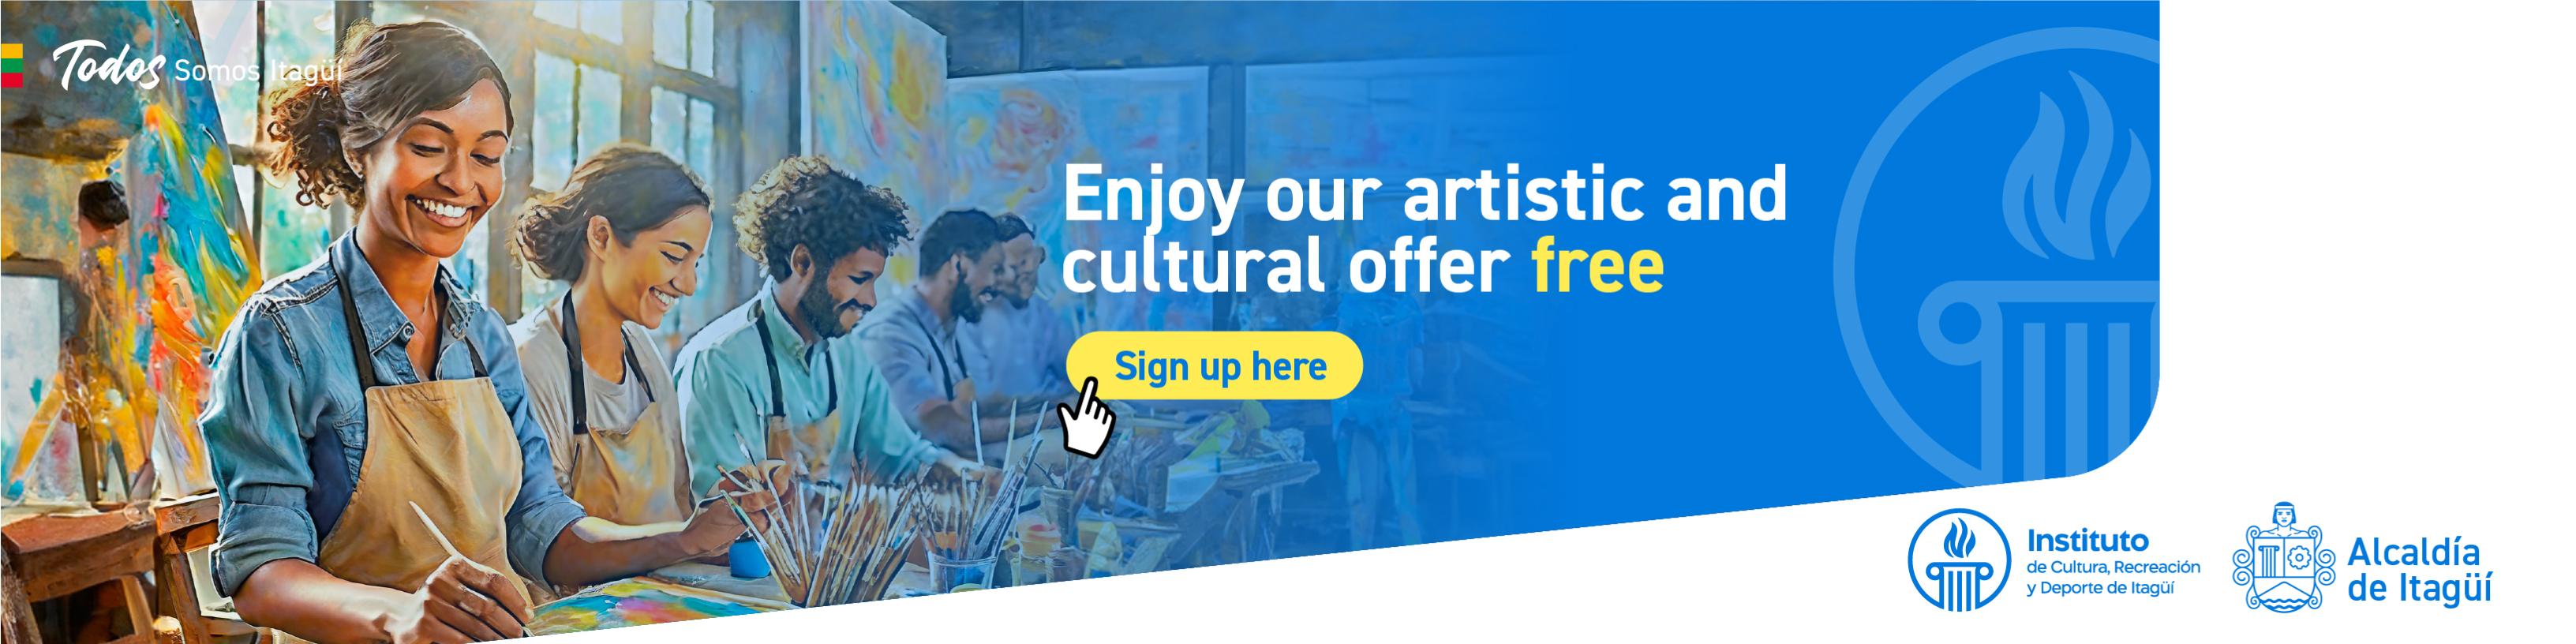 Enjoy our artistic and cultural offer free